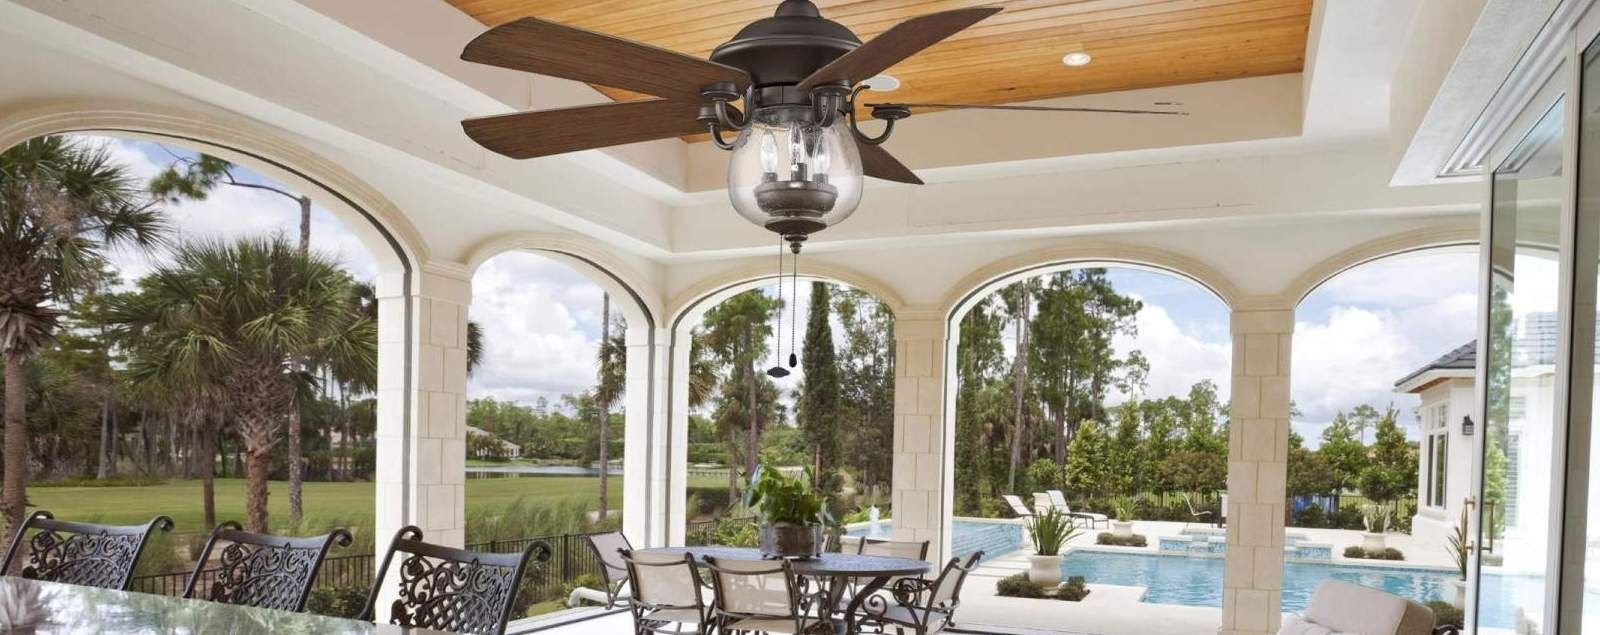 Outdoor Ceiling Fans – Shop Wet, Dry, And Damp Rated Outdoor Fans Throughout Preferred Damp Rated Outdoor Ceiling Fans (View 6 of 20)